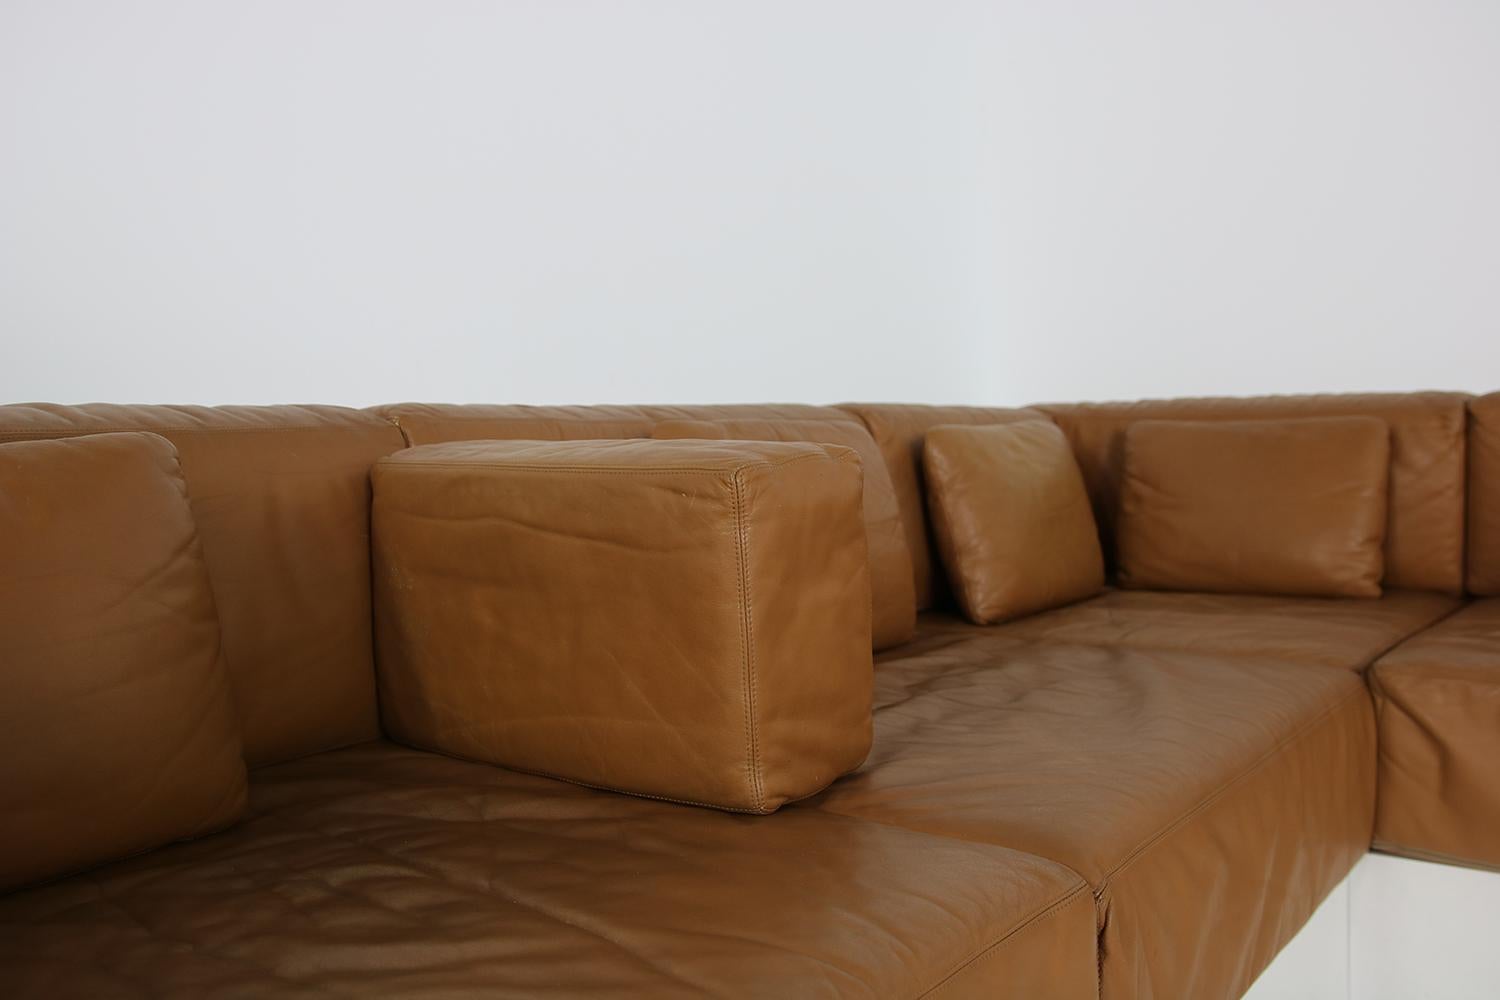 Unique & Large 1960s Landscape Sofa & Chairs Brown Leather Made to Order 1969 For Sale 2